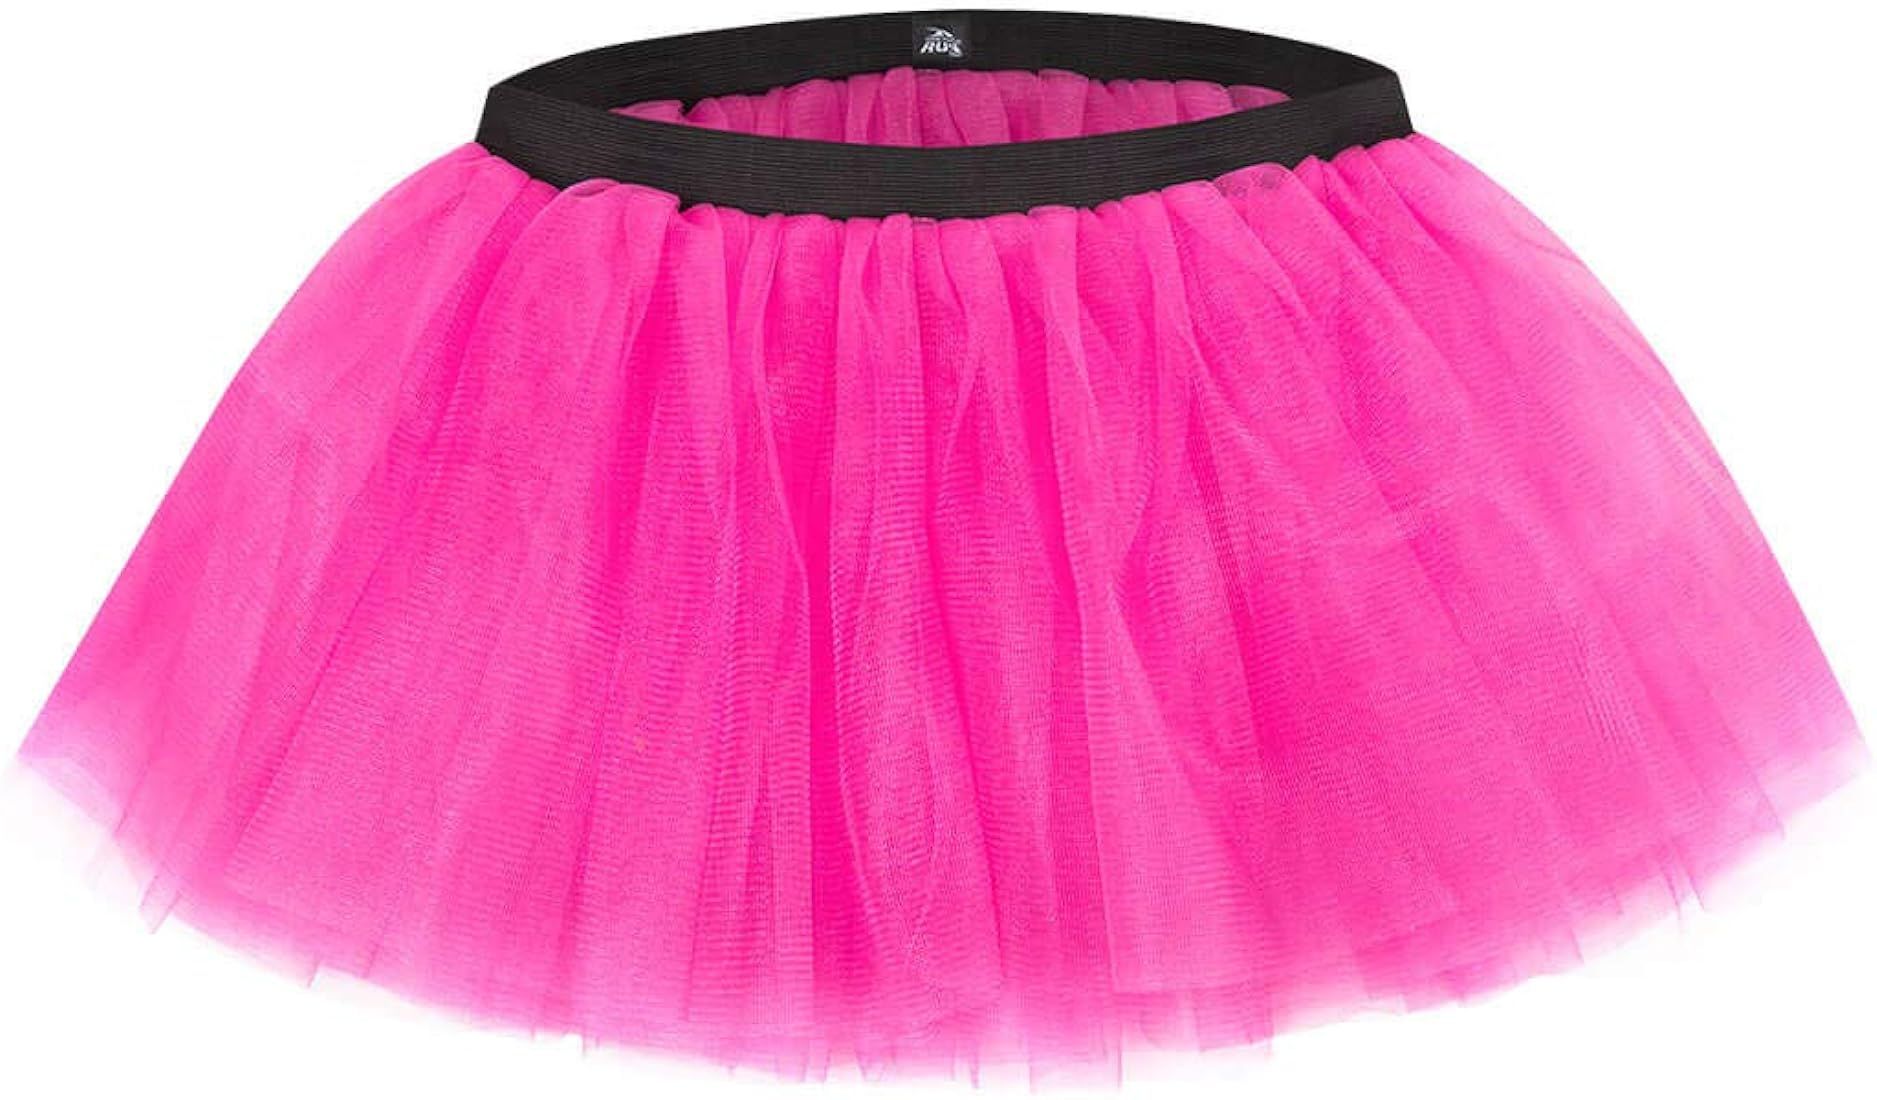 Gone For a Run Runners Tutu | Lightweight | One Size Fits Most | Colorful Running Skirts | Amazon (US)